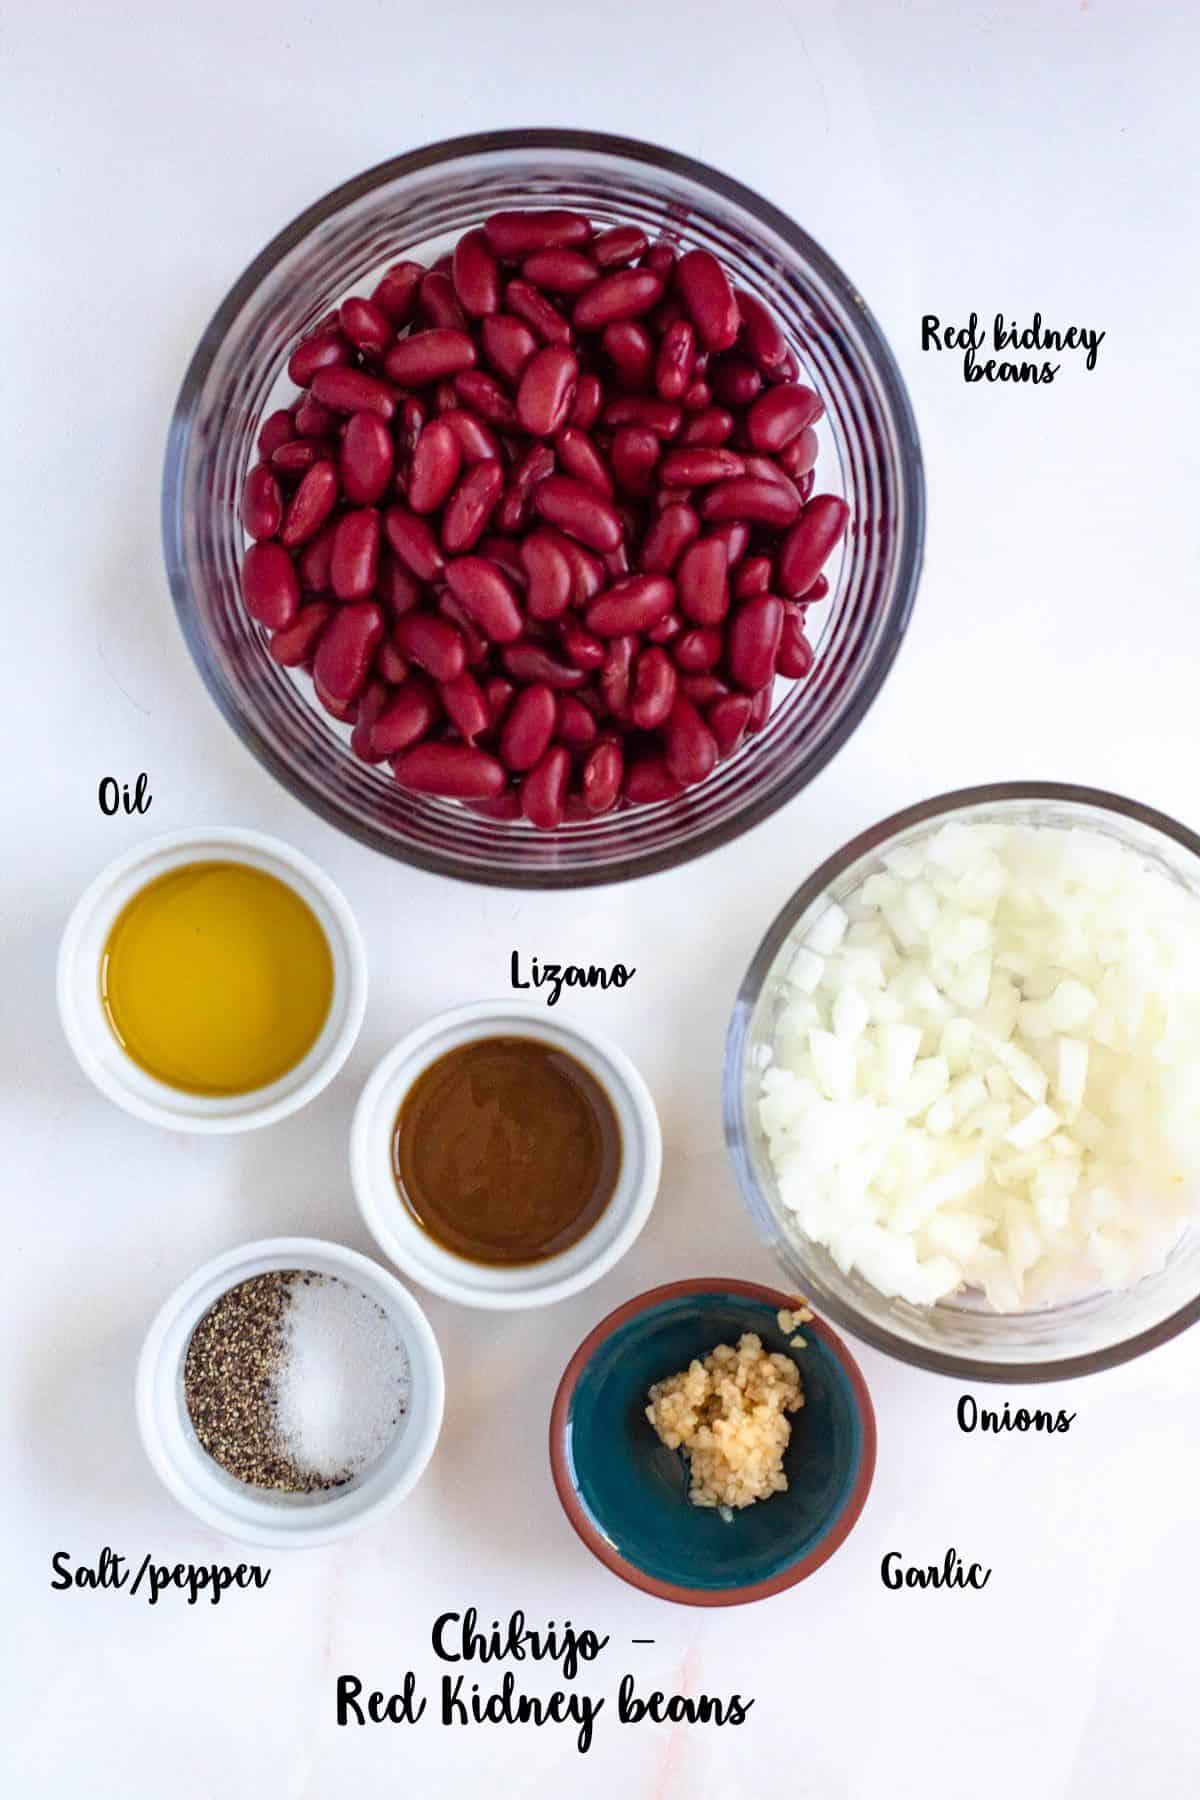 Ingredients shown are used to prepare red kidney beans to serve with chifrijo. 